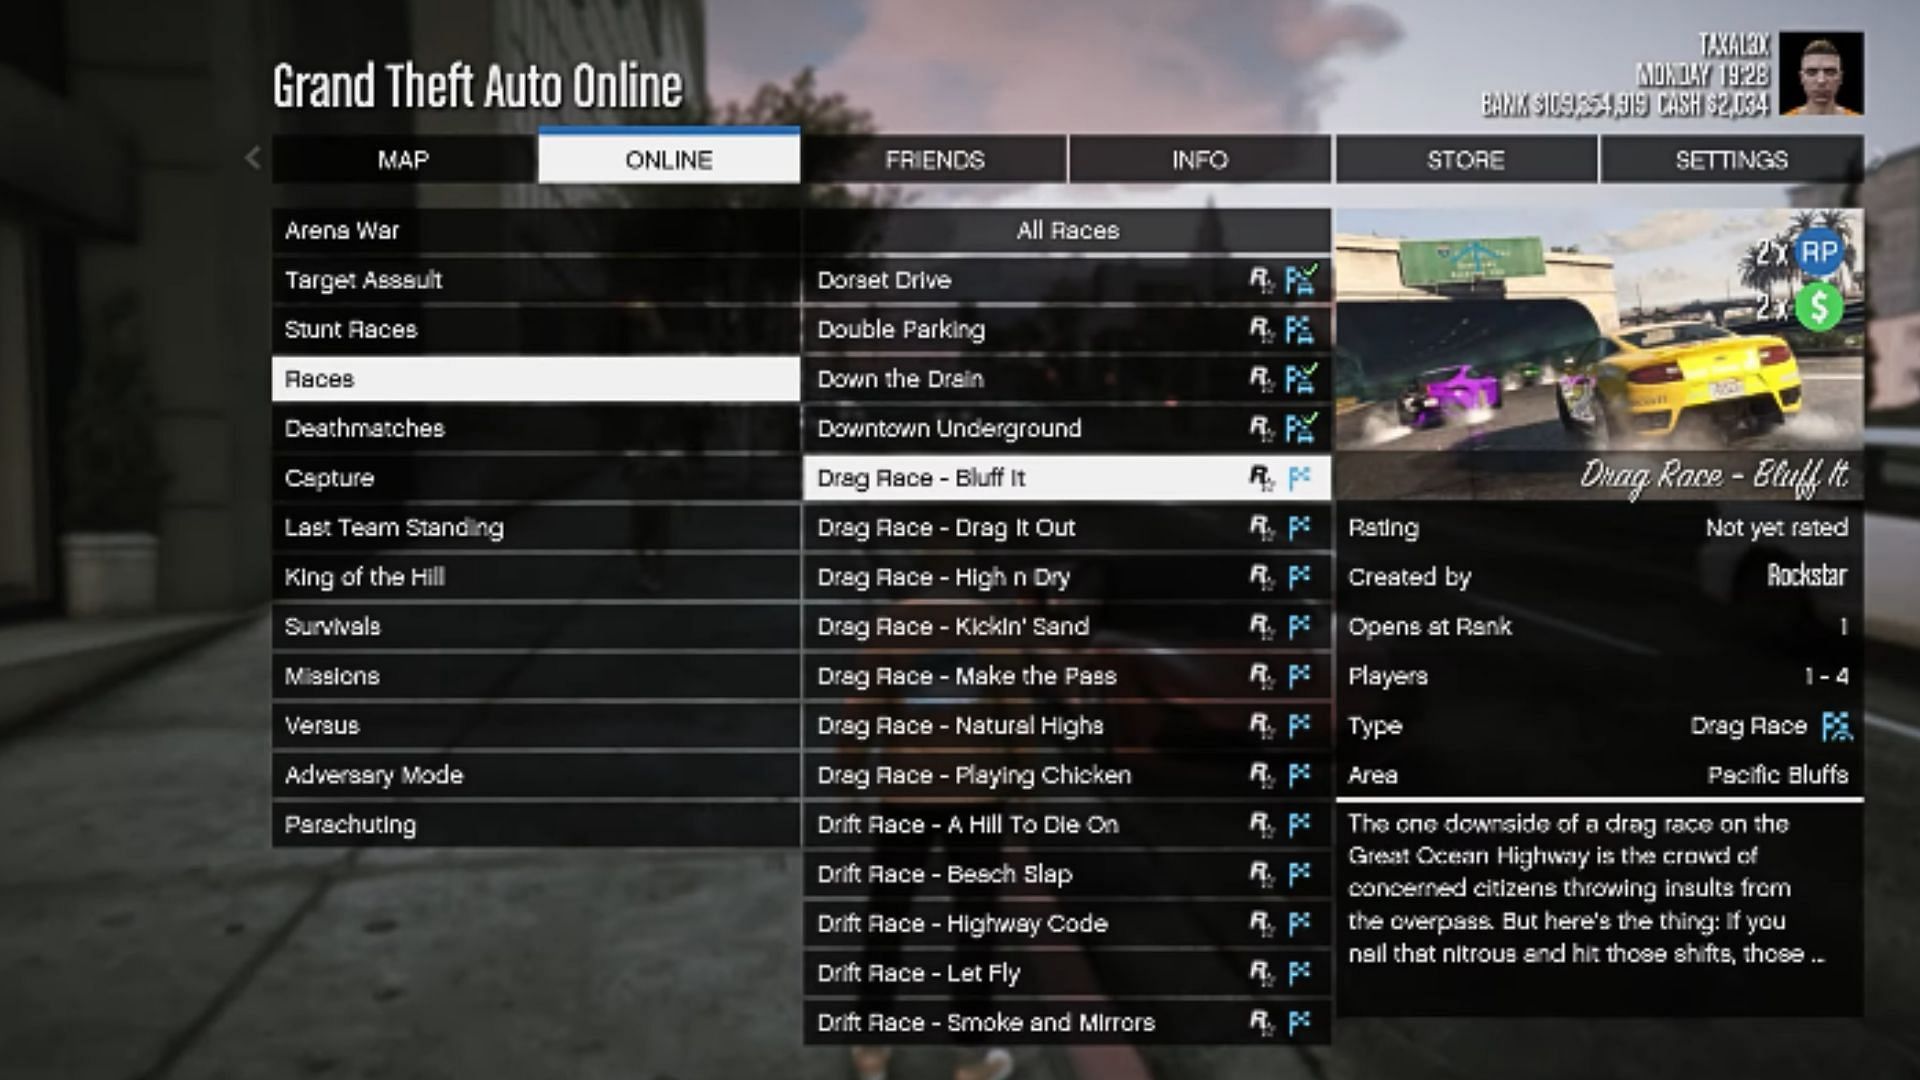 Drag Races can be started from the Pause Menu (Image via YouTube/GTA Series Videos)